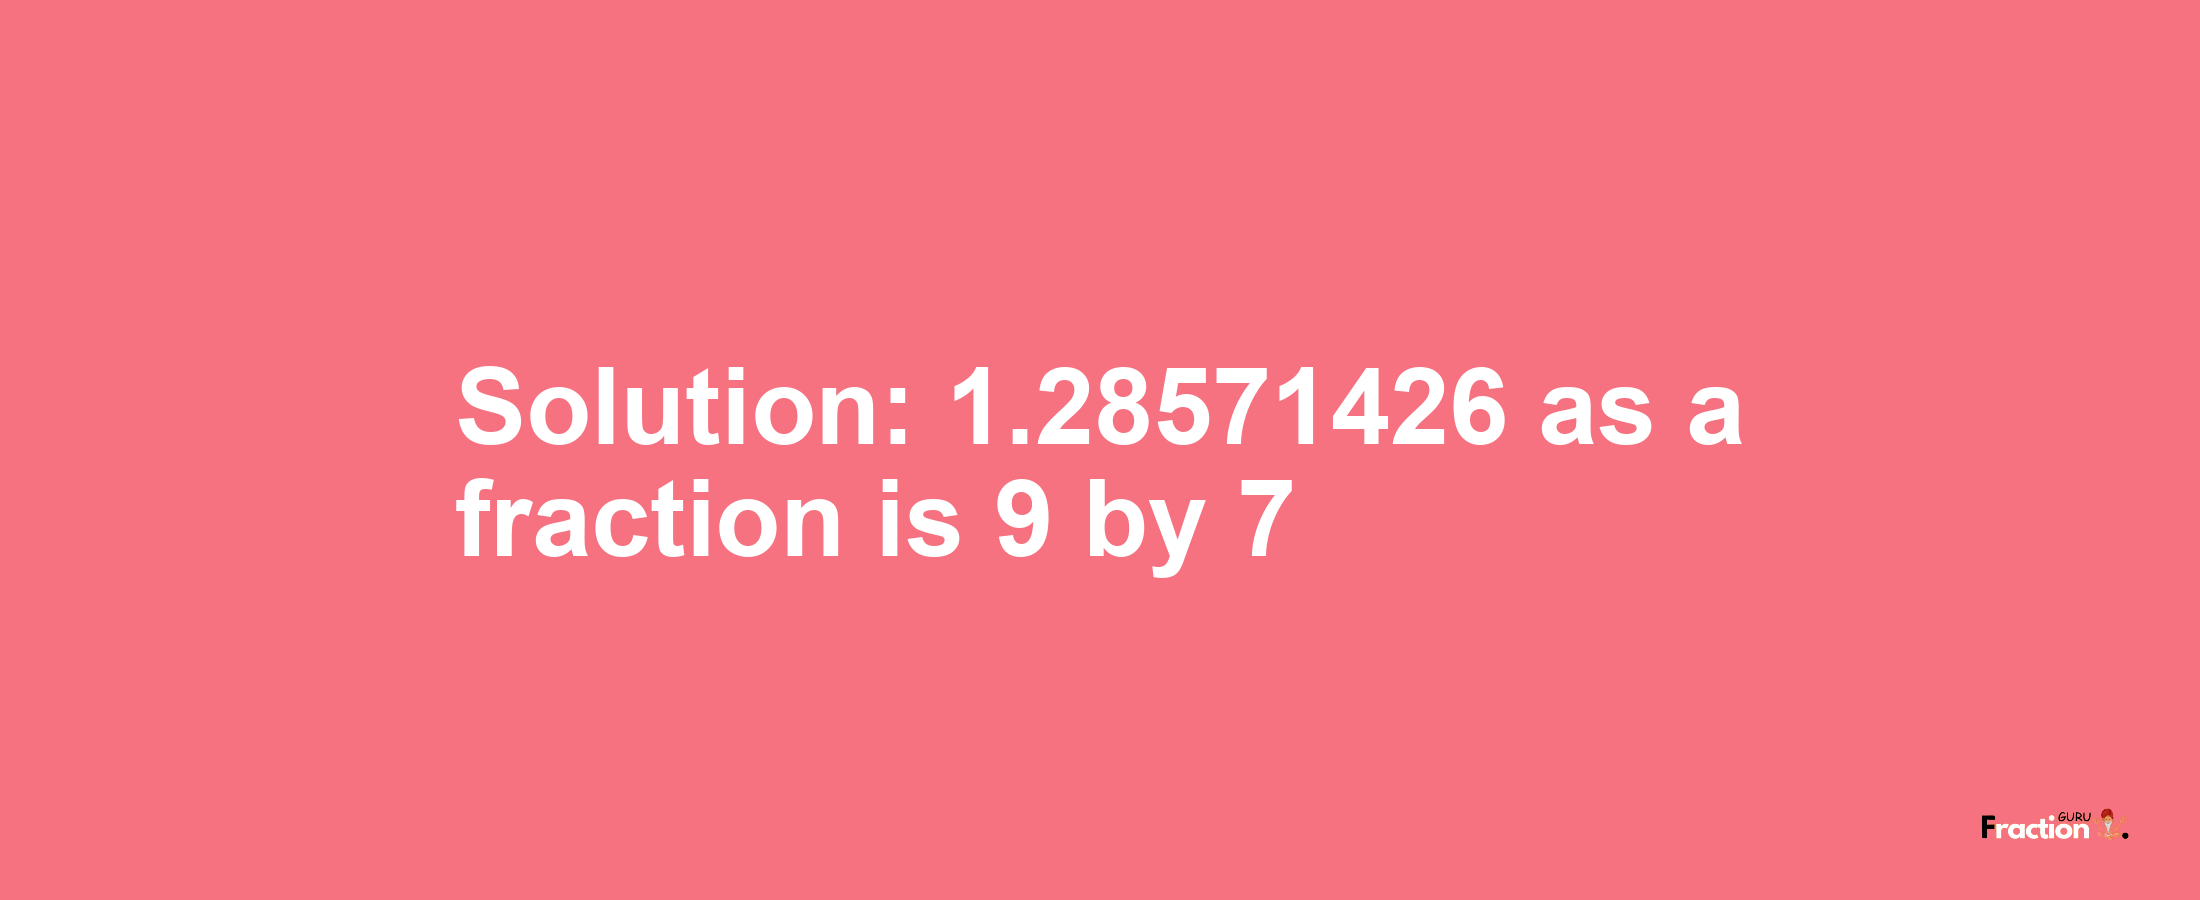 Solution:1.28571426 as a fraction is 9/7